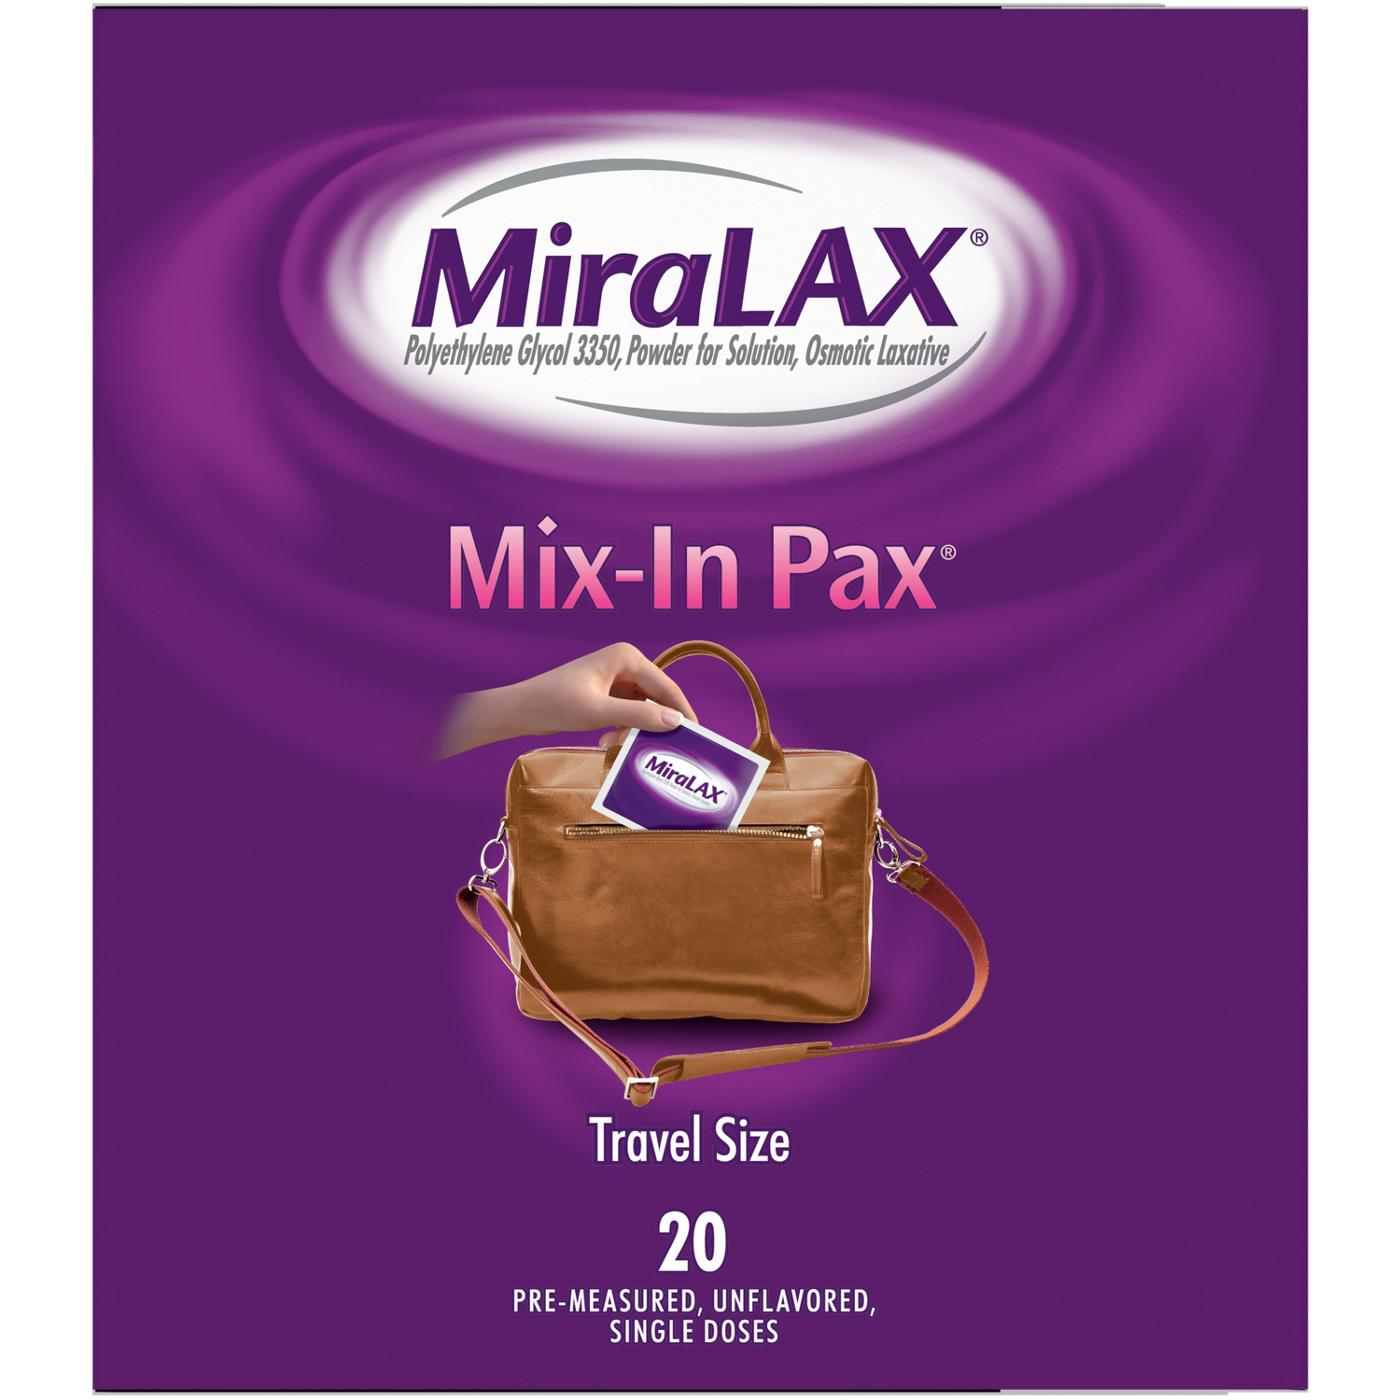 MiraLAX Mix-in Pax Unflavored Powder Packets; image 4 of 5